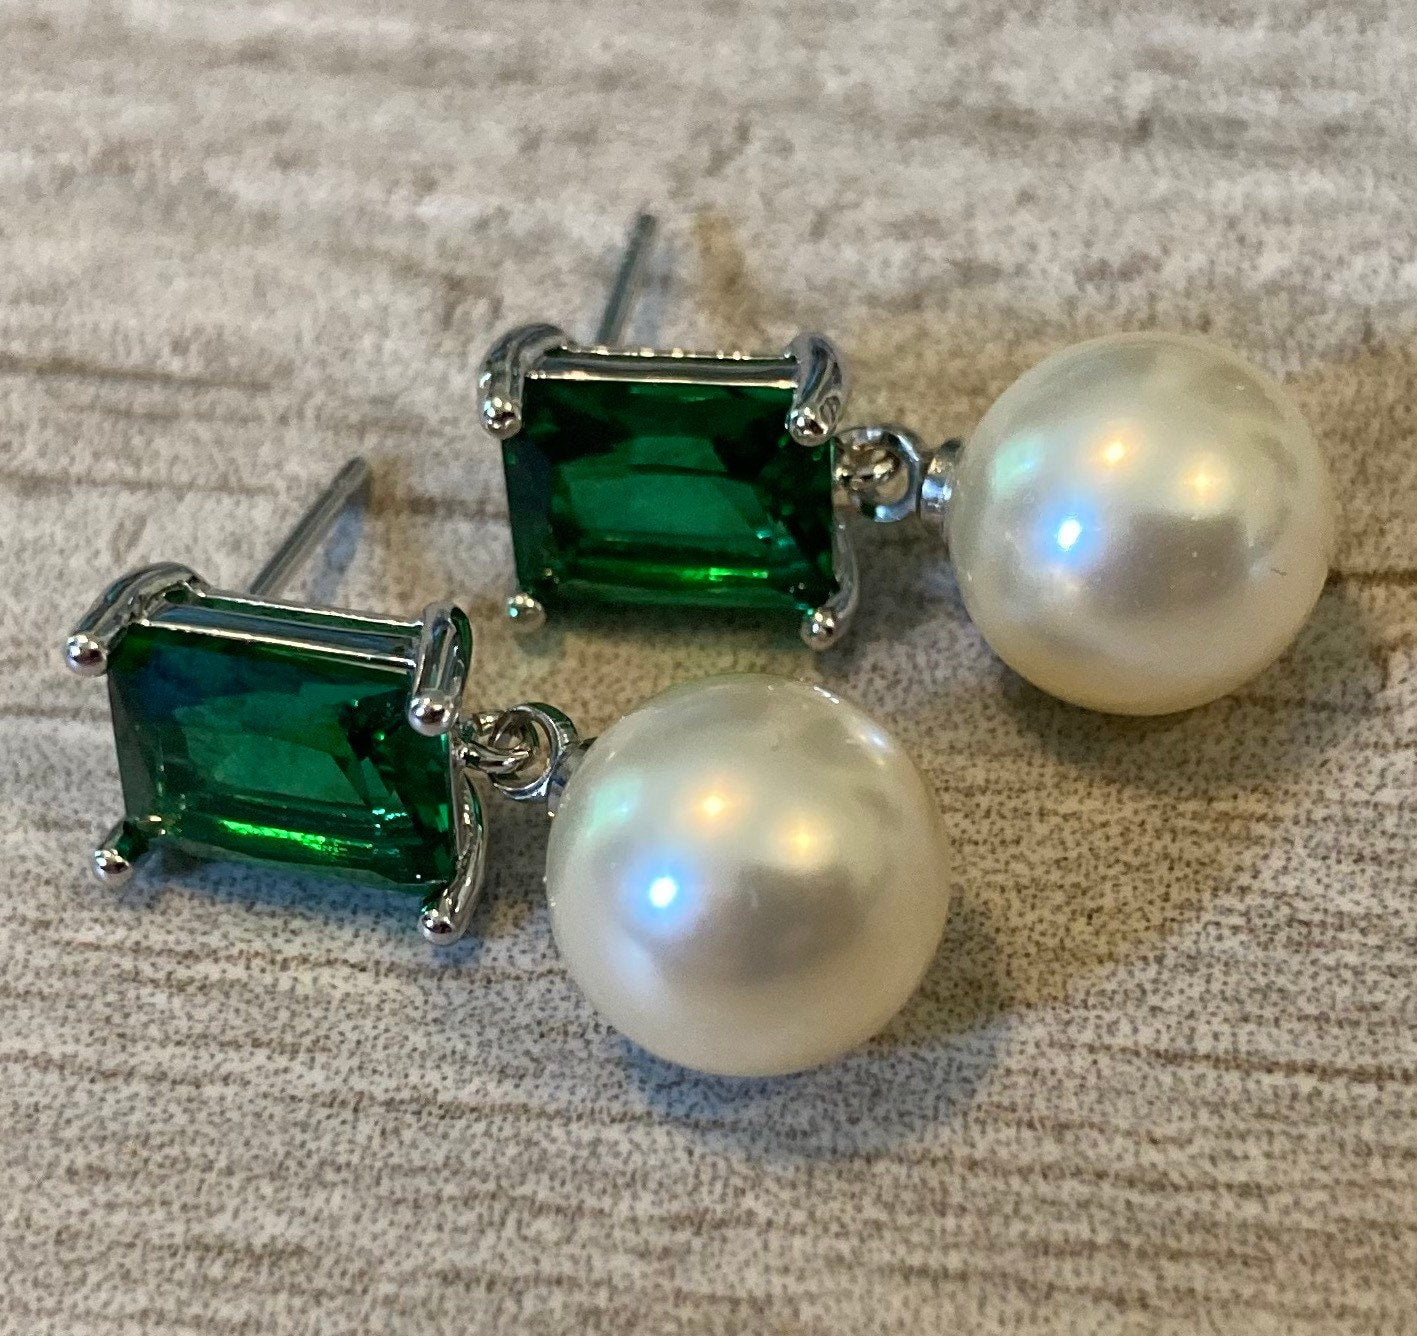 Pearl Earrings with Green Rhinestone White Pearl Earrings Gold or Silver post Emerald Green wedding earrings mother of the bride classic